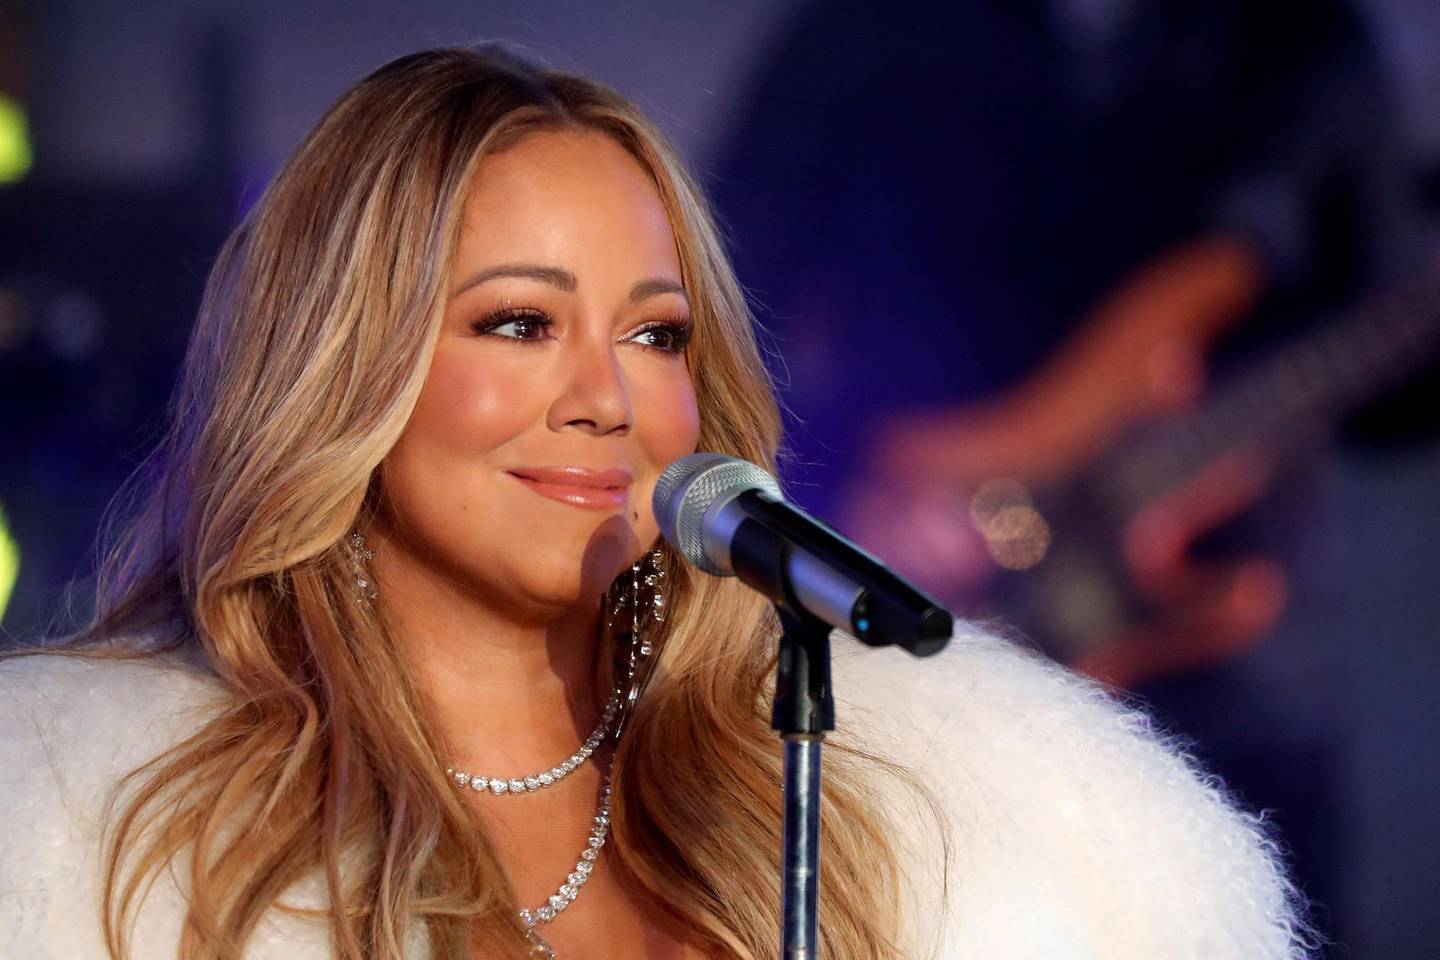 FILE PHOTO: Mariah Carey performs during New Year's eve celebrations in Times Square in New York City, New York, U.S., December 31, 2017. REUTERS/Carlo Allegri/File Photo